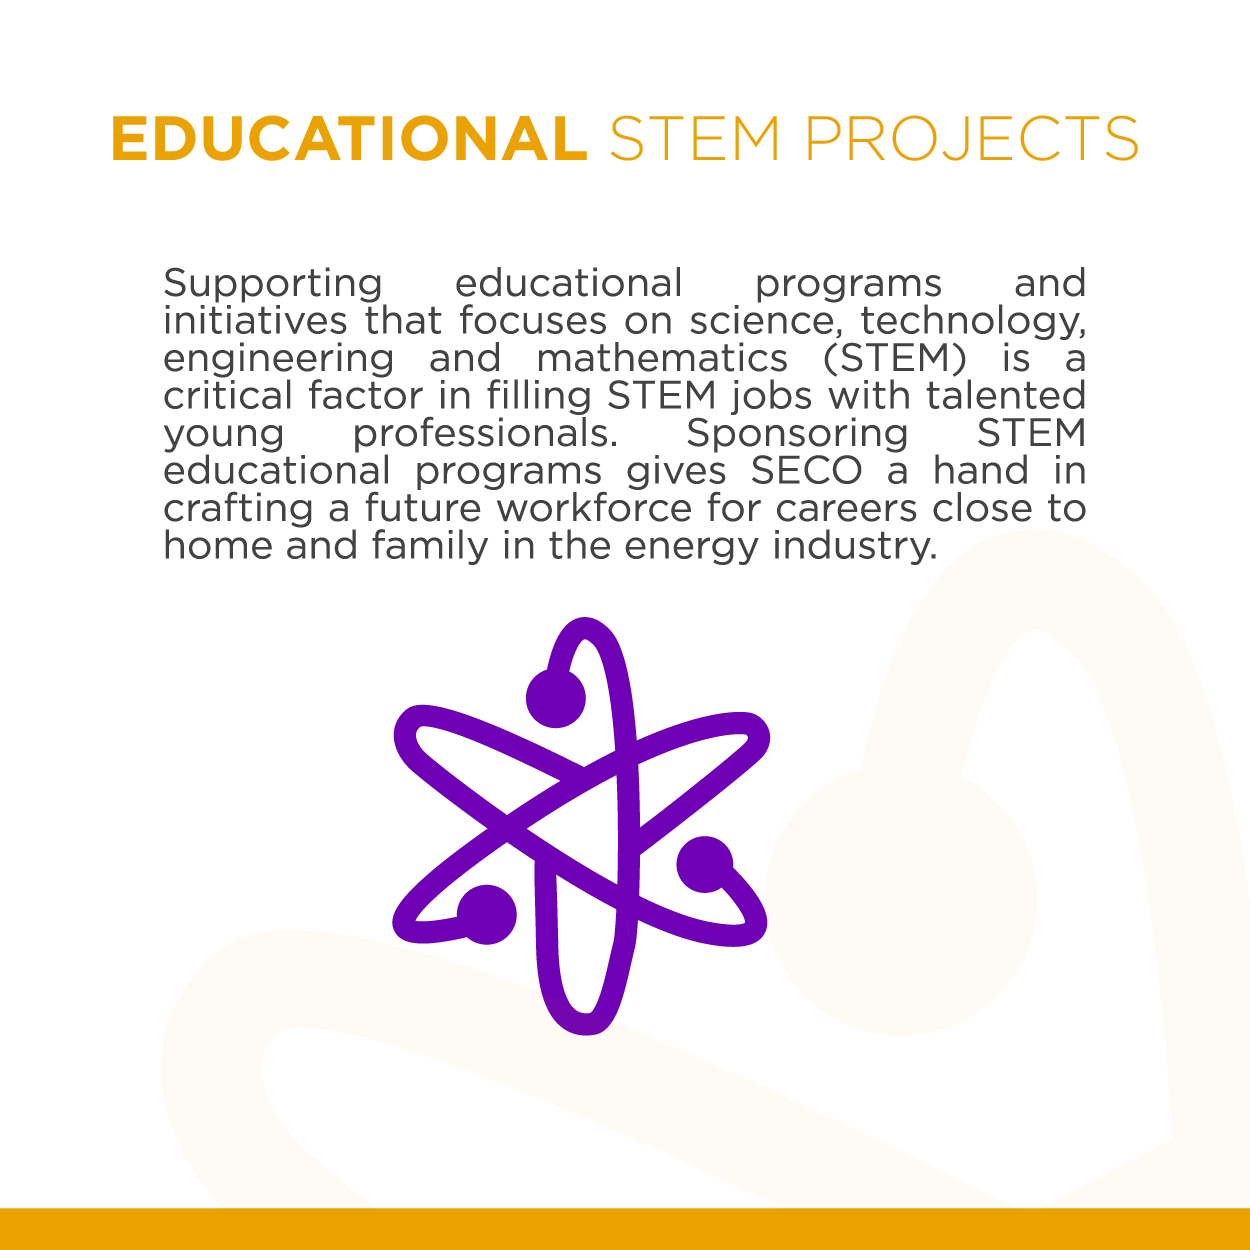 Educational Stem Projects Sponsoring STEM educational programs gives SECO a hand in crafting a future workforce for careers close to home and family in the energy industry.